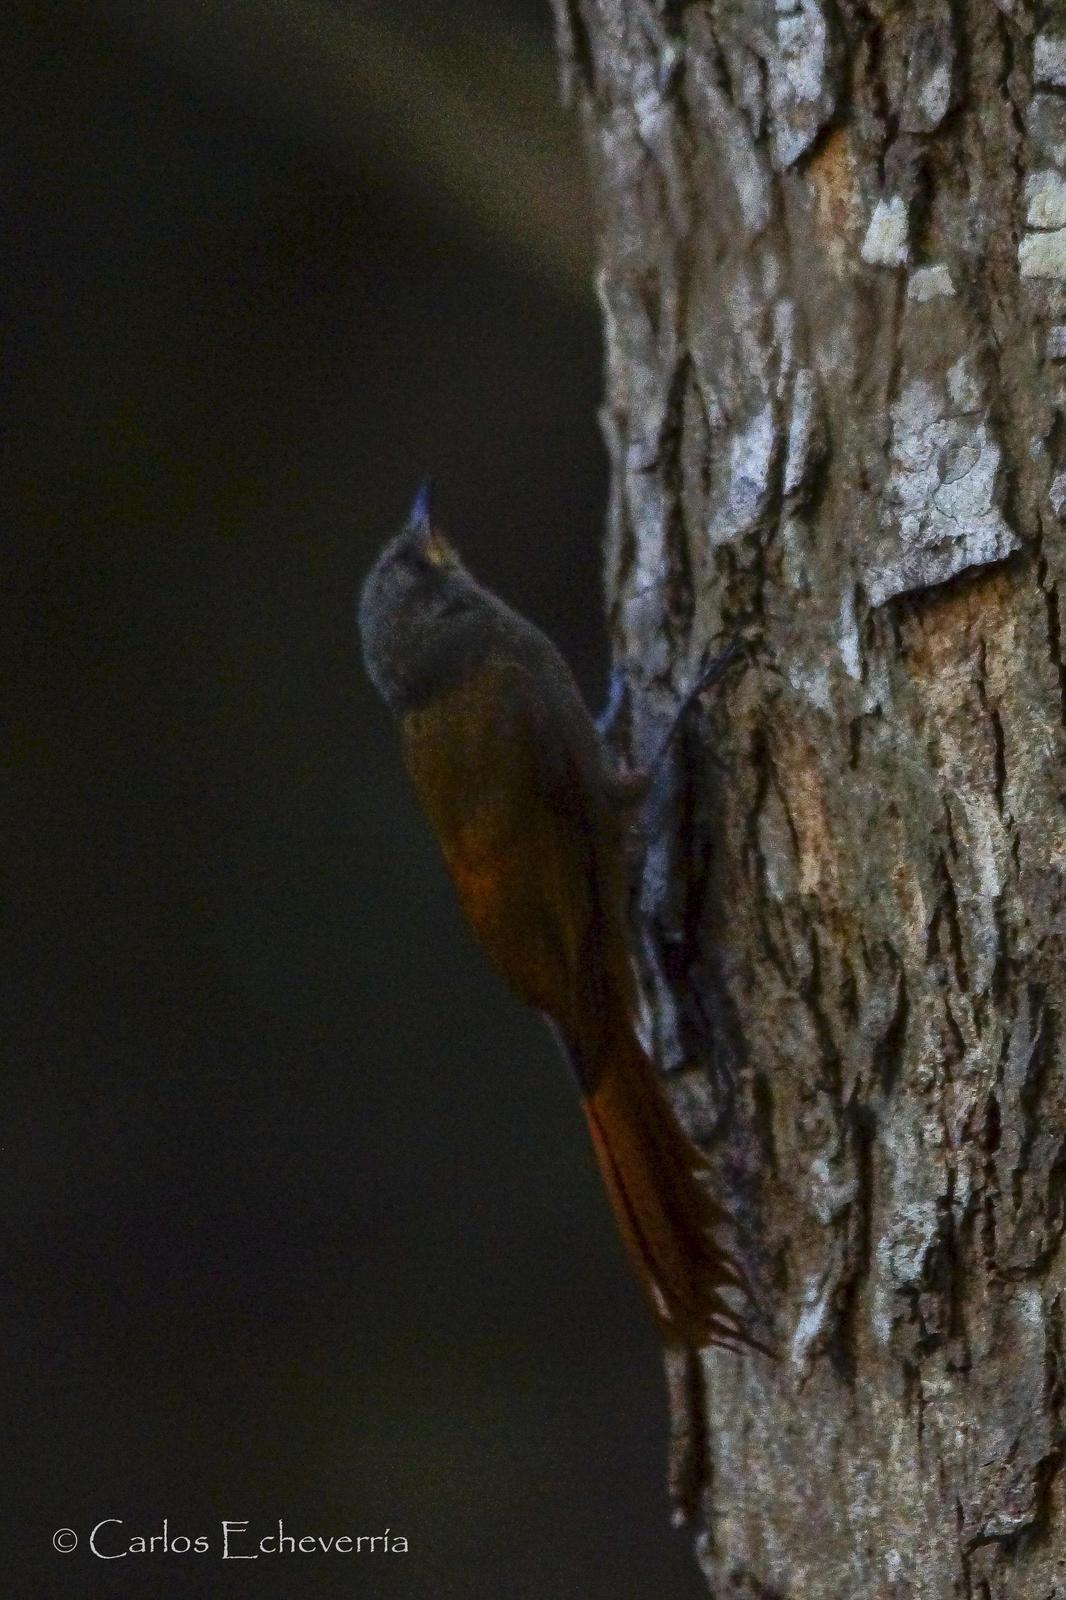 Olivaceous Woodcreeper Photo by Carlos Echeverría